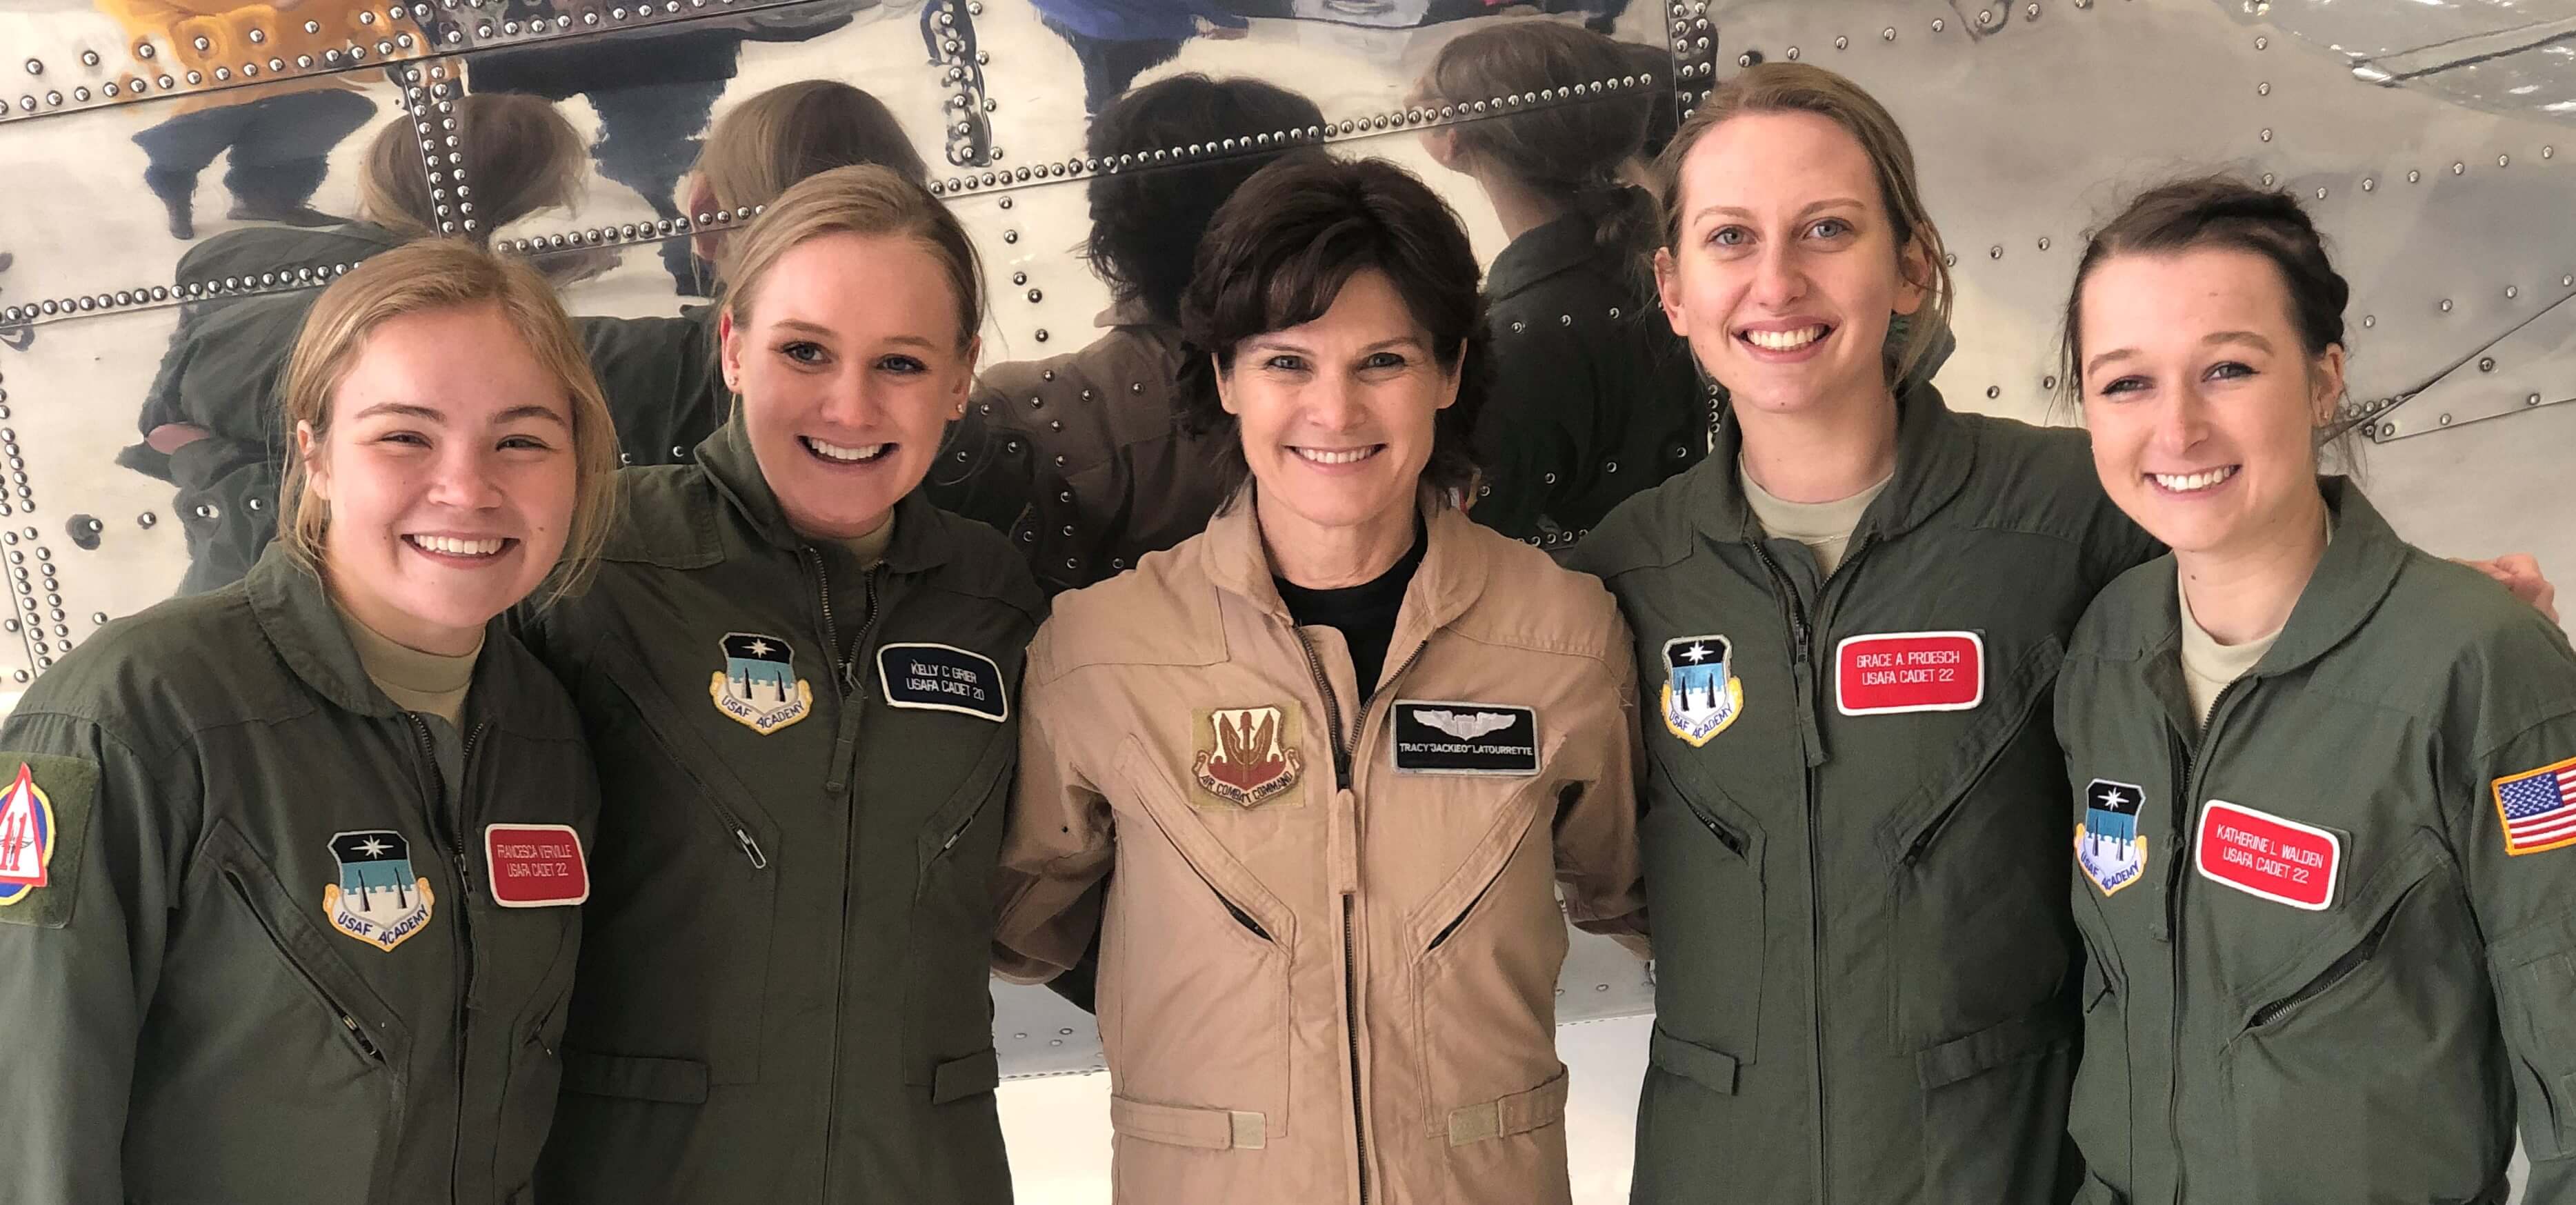 Image of Tracy LaTourrette and four female cadets in flight suits